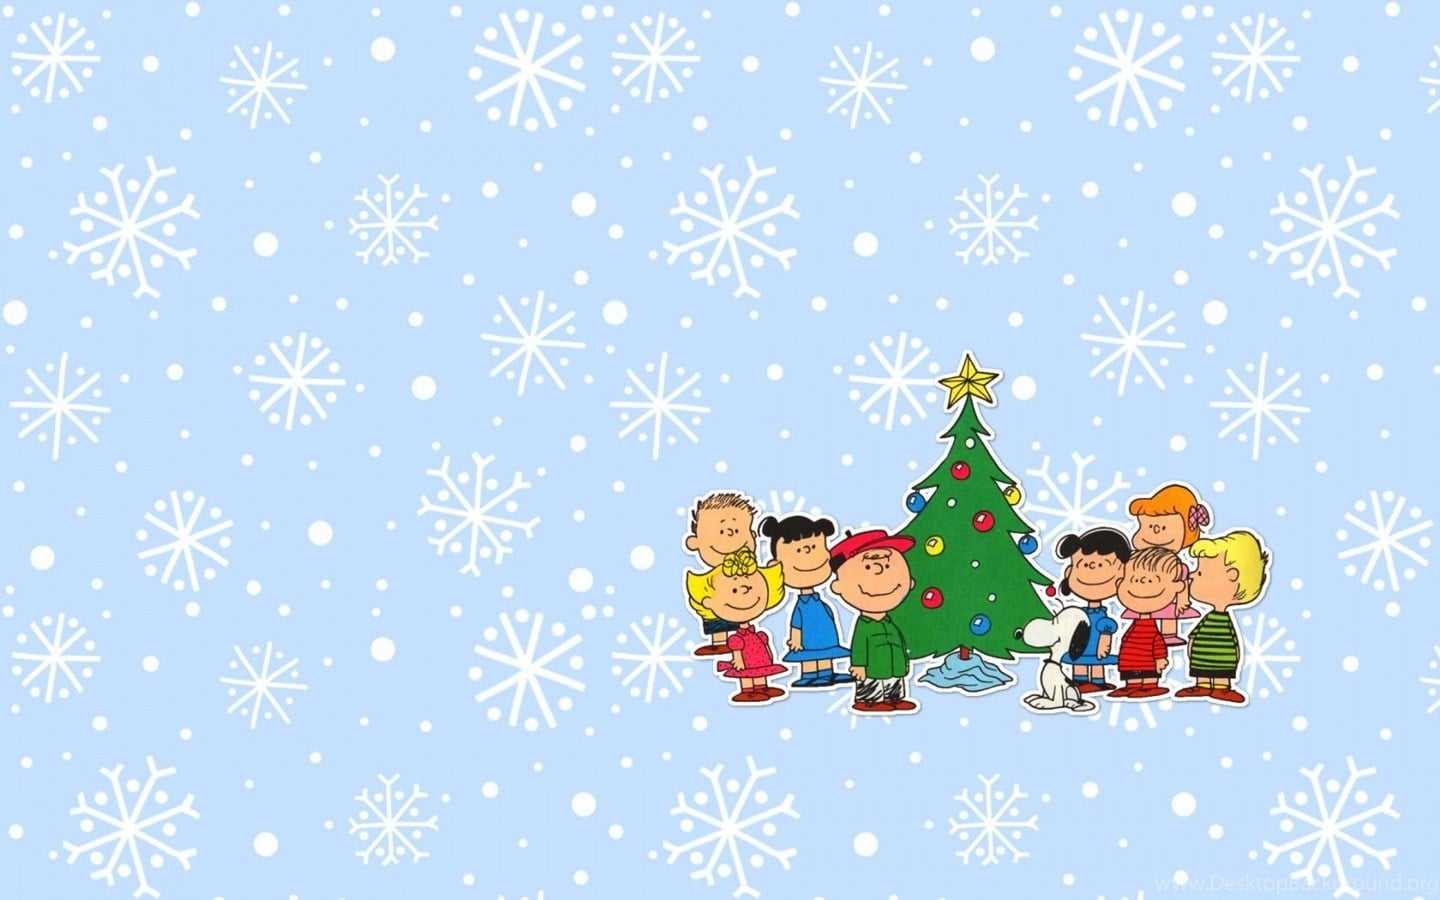 Charlie Brown Christmas wallpaper with Snoopy and the gang around the tree. - Cute Christmas